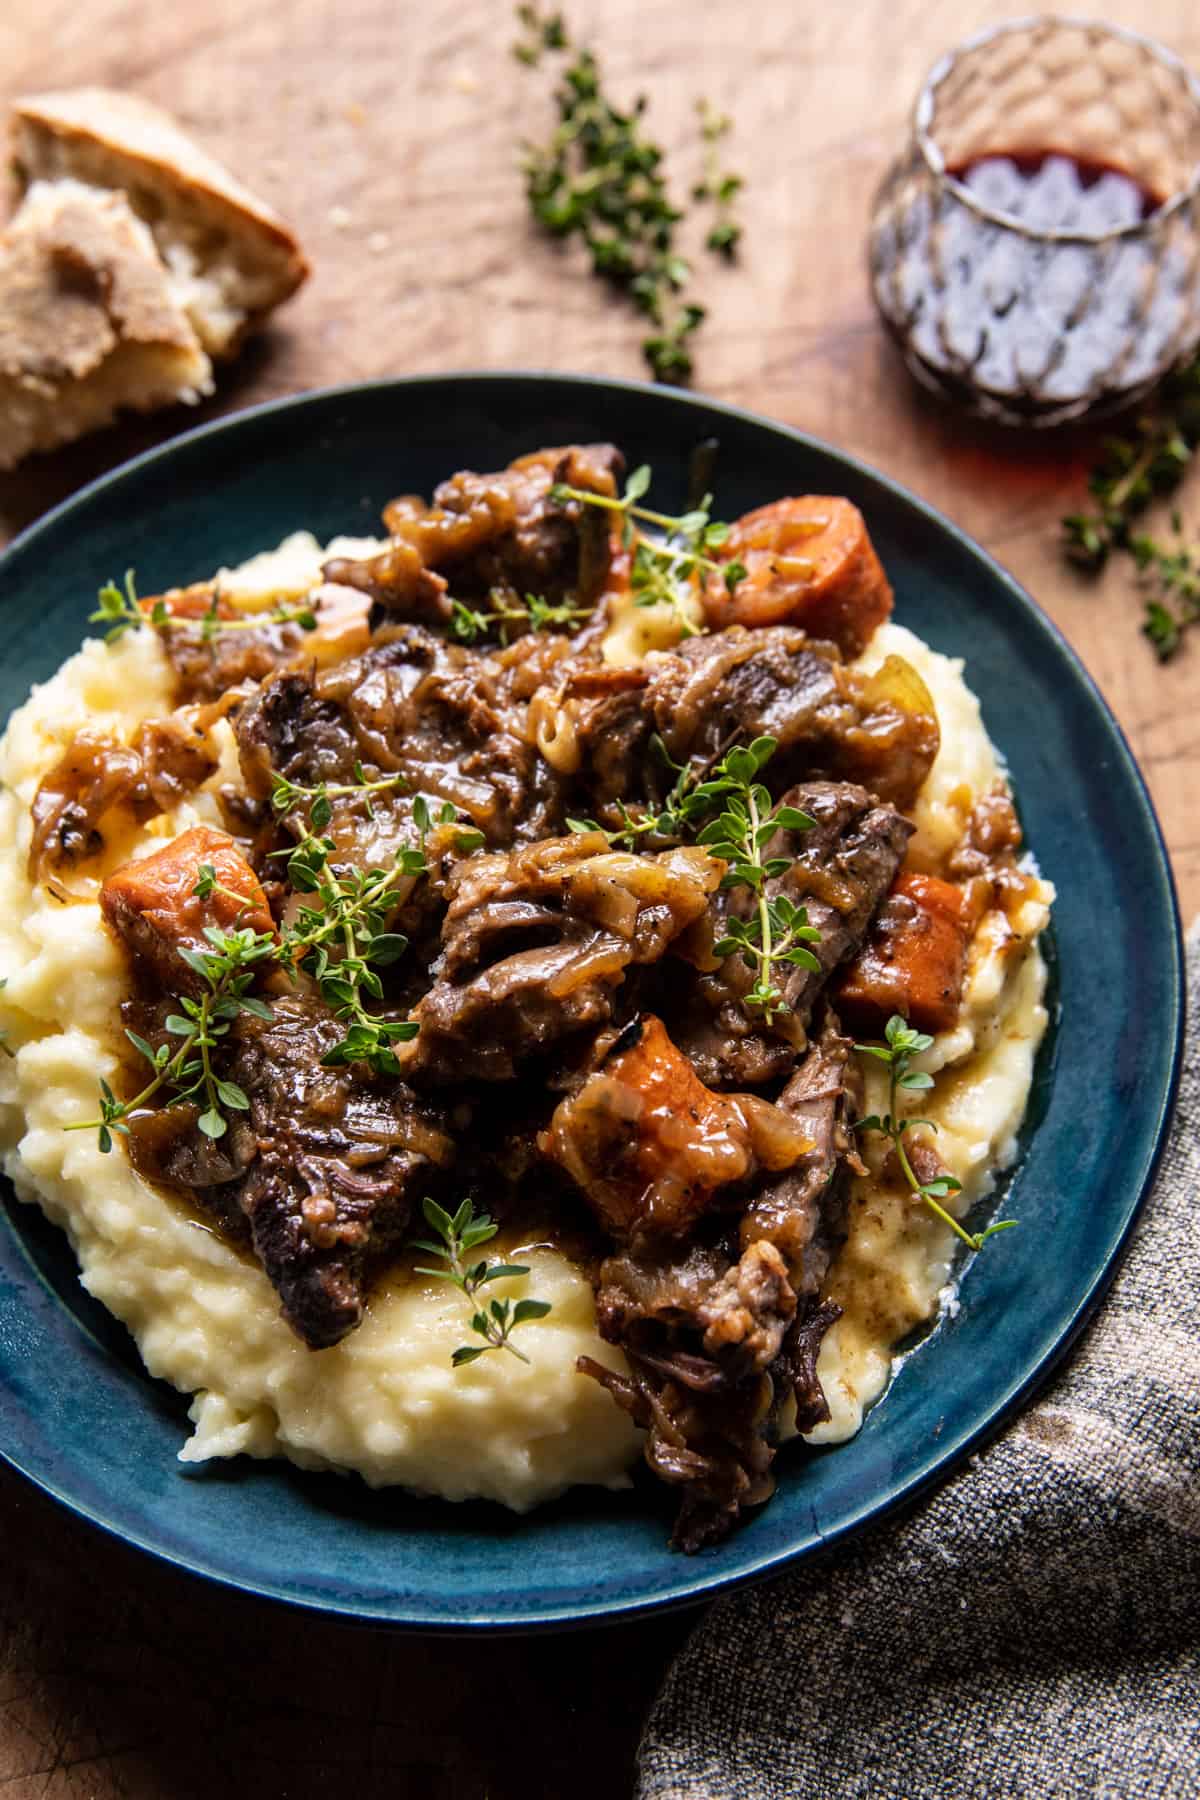 Cider Braised Short Ribs with Caramelized Onions | halffbakedharvest.com